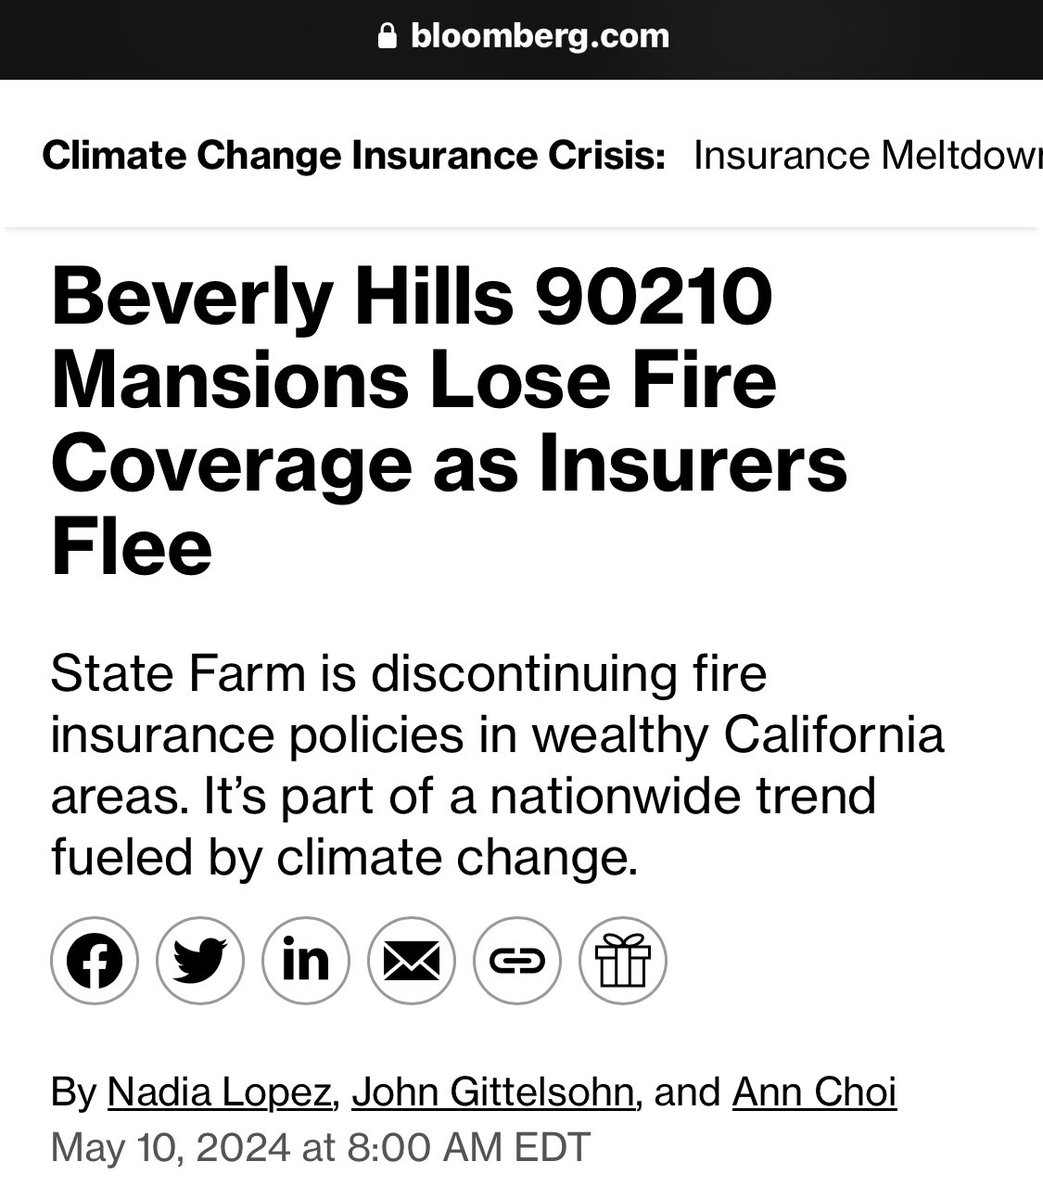 🚨This should be much bigger news. Even the wealthiest communities in the United States are becoming uninsurable.